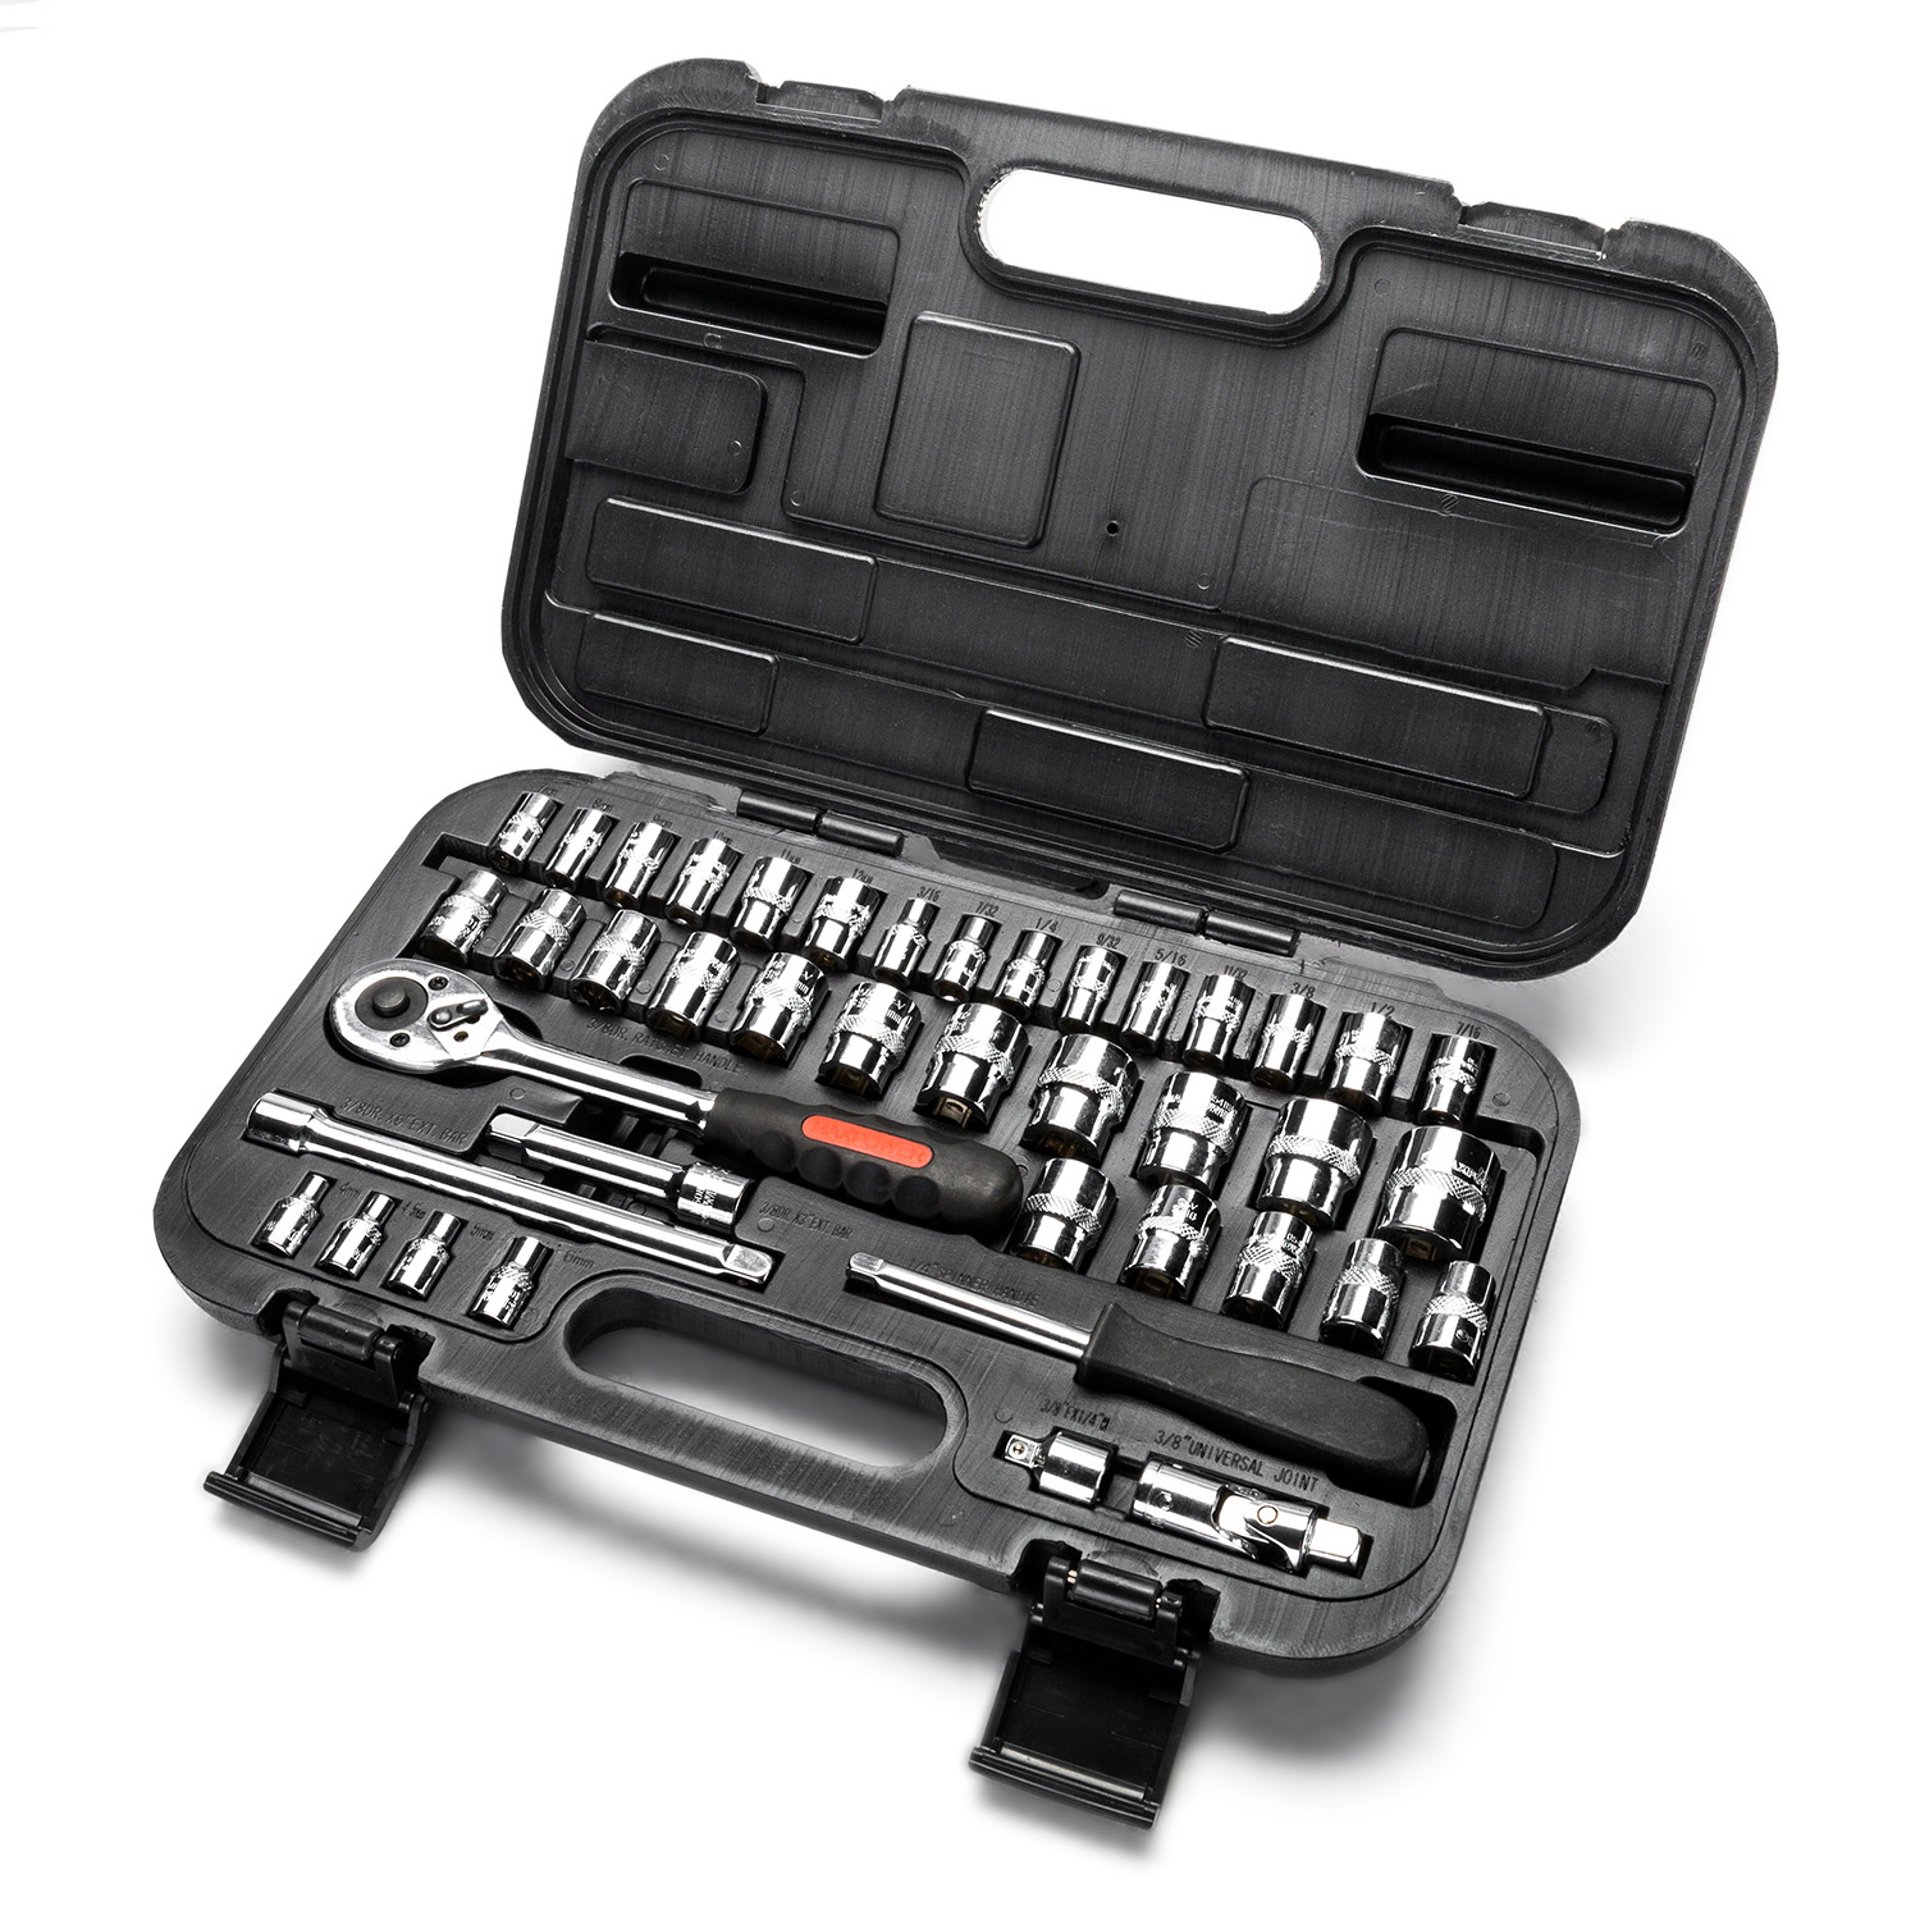 MAXPOWER 42-Piece 1/4" & 3/8" Dr. Socket Wrench Set